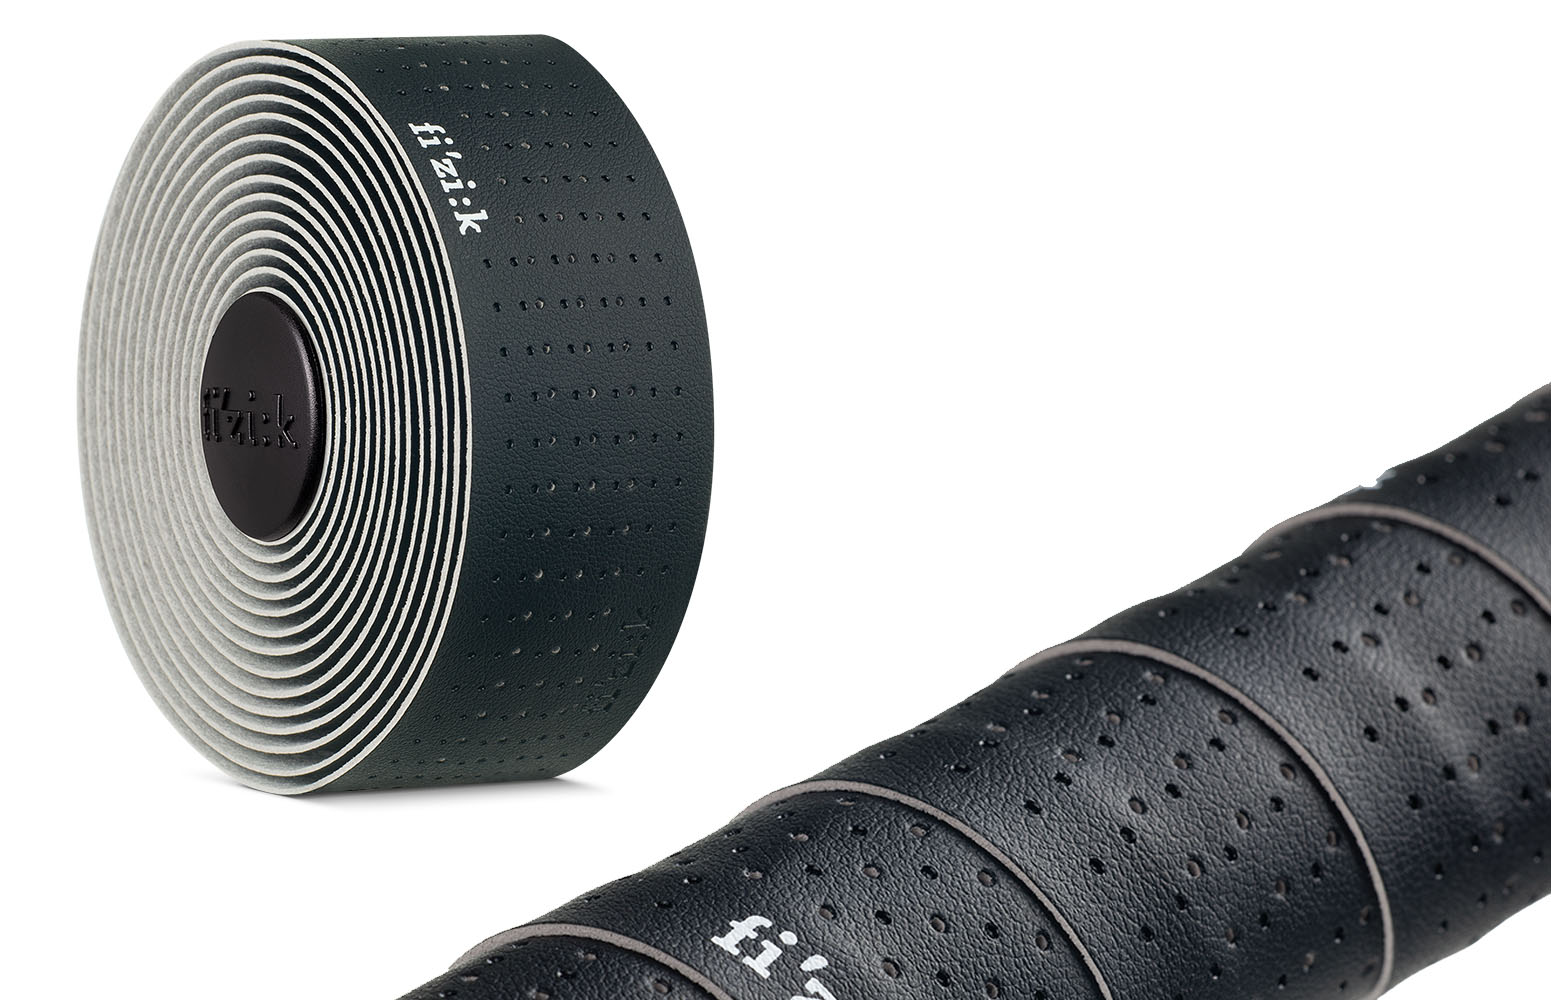 Fizik gets a grip on rider specific bar tapes with new handlebar wrap range